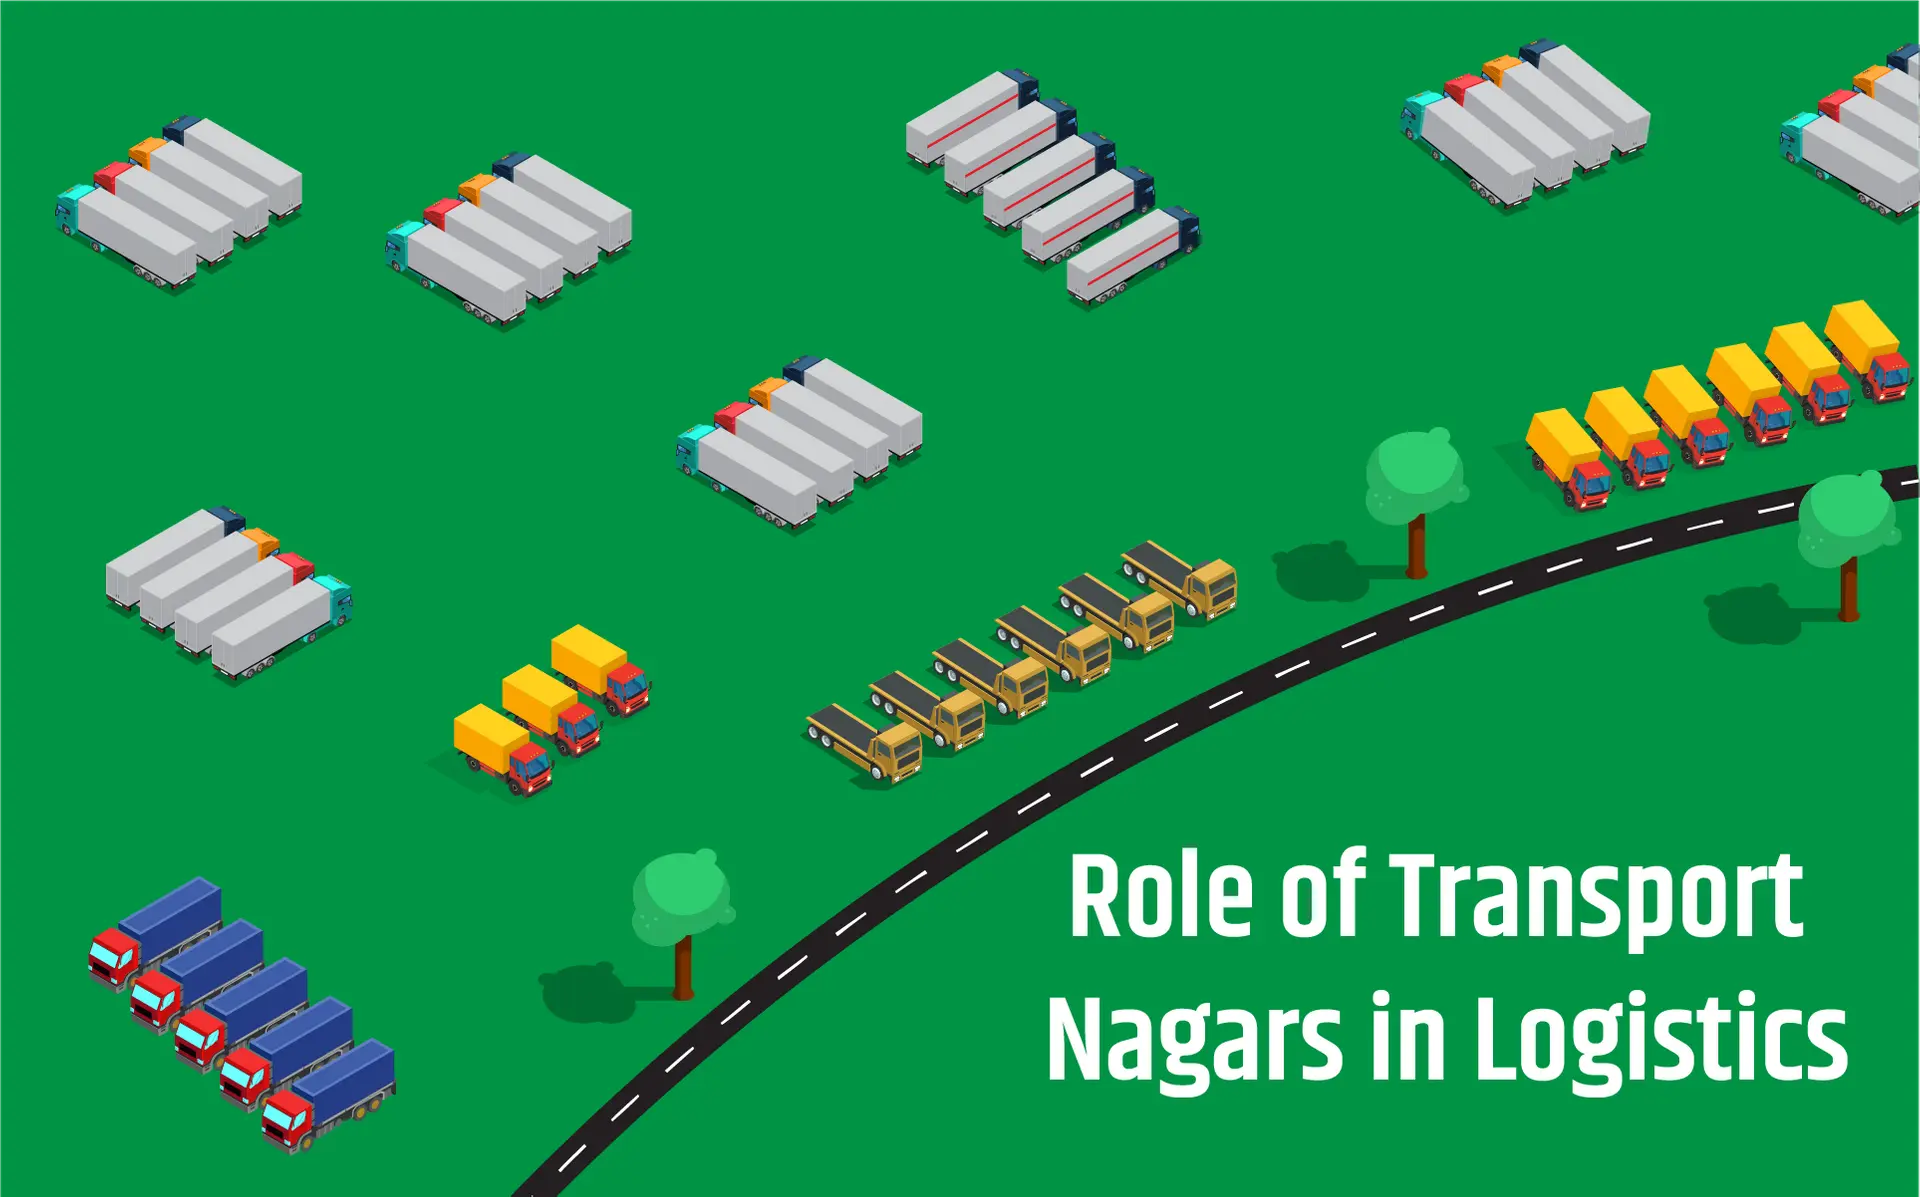 What Are Transport Nagars? Why Are They Important?